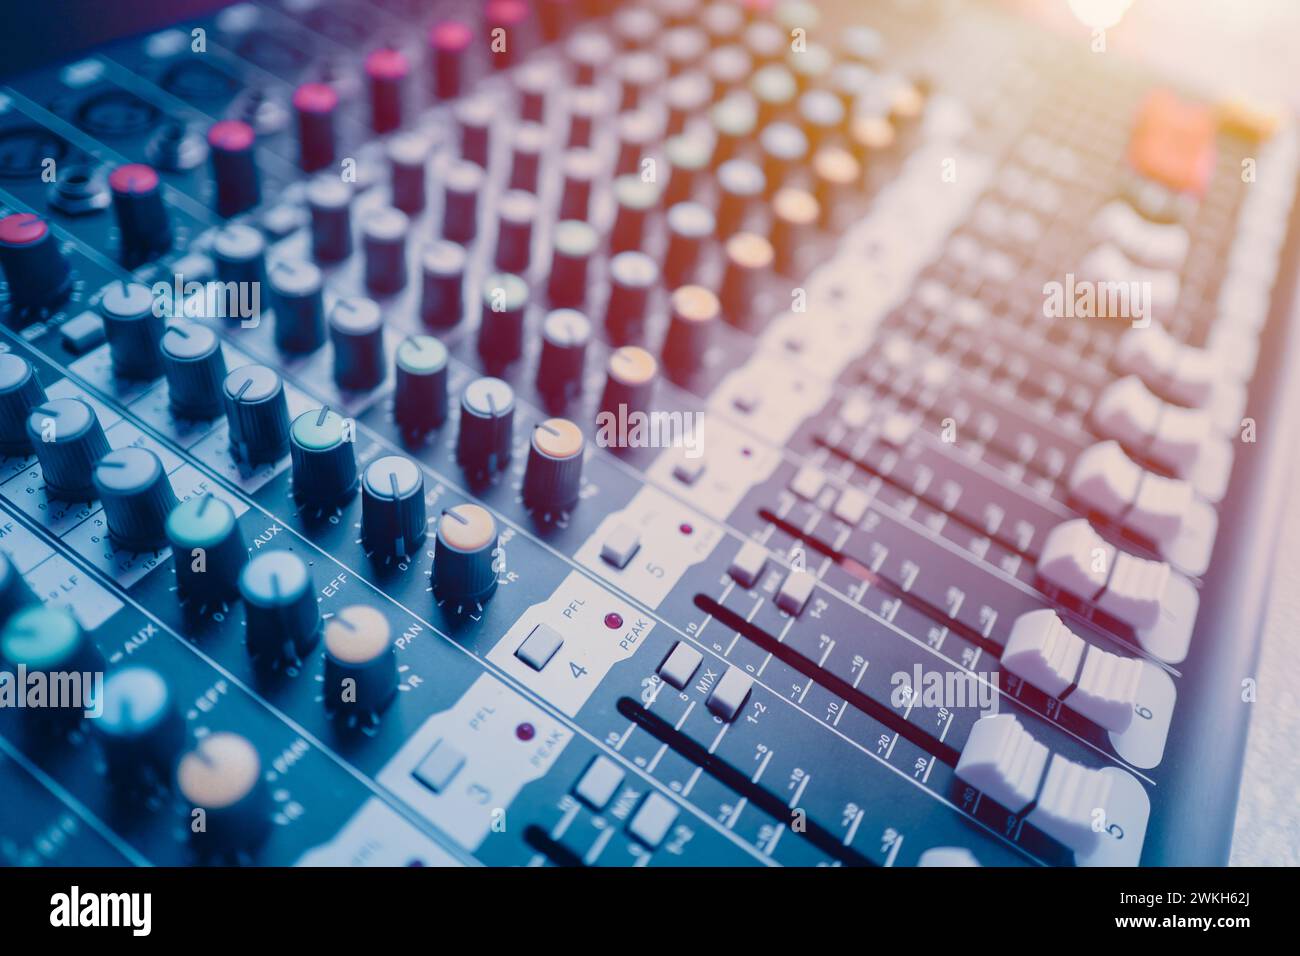 Closeup multi channel digital sounds mixer for voice recording. Sound engineer tools editor in studio or stage show instruments blue color tone Stock Photo